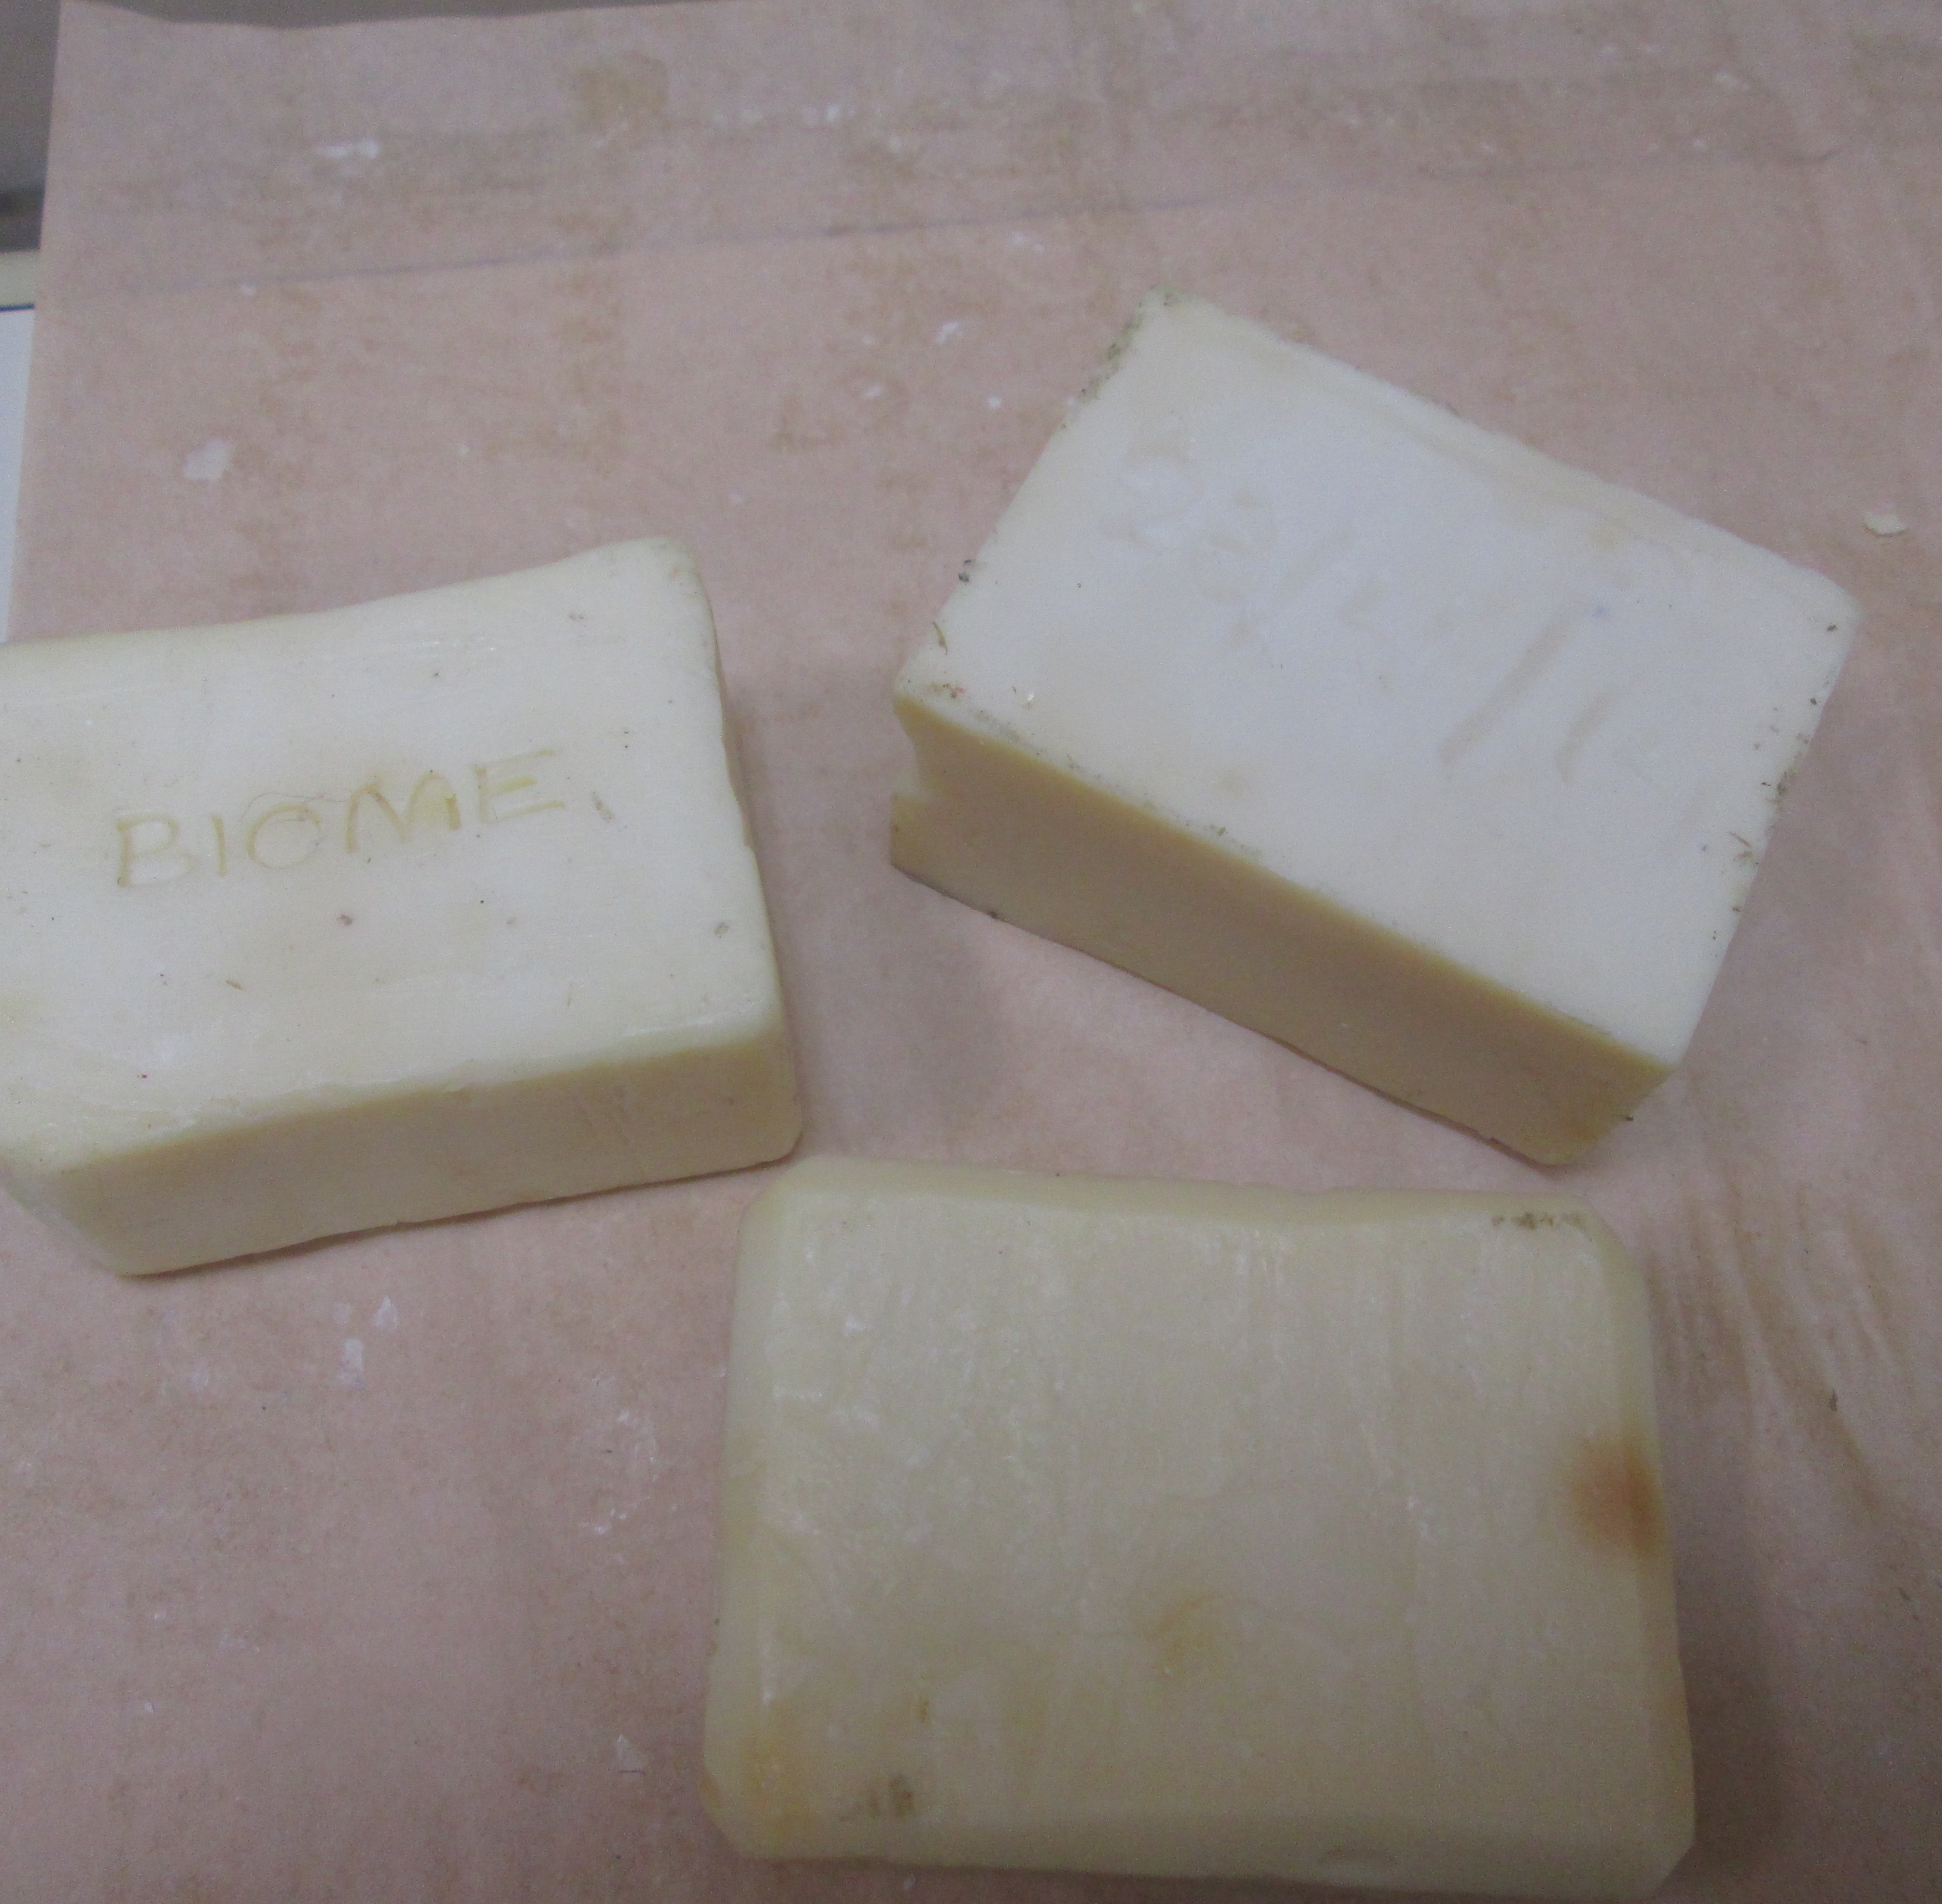 The soap produced collectively at Vio.me.